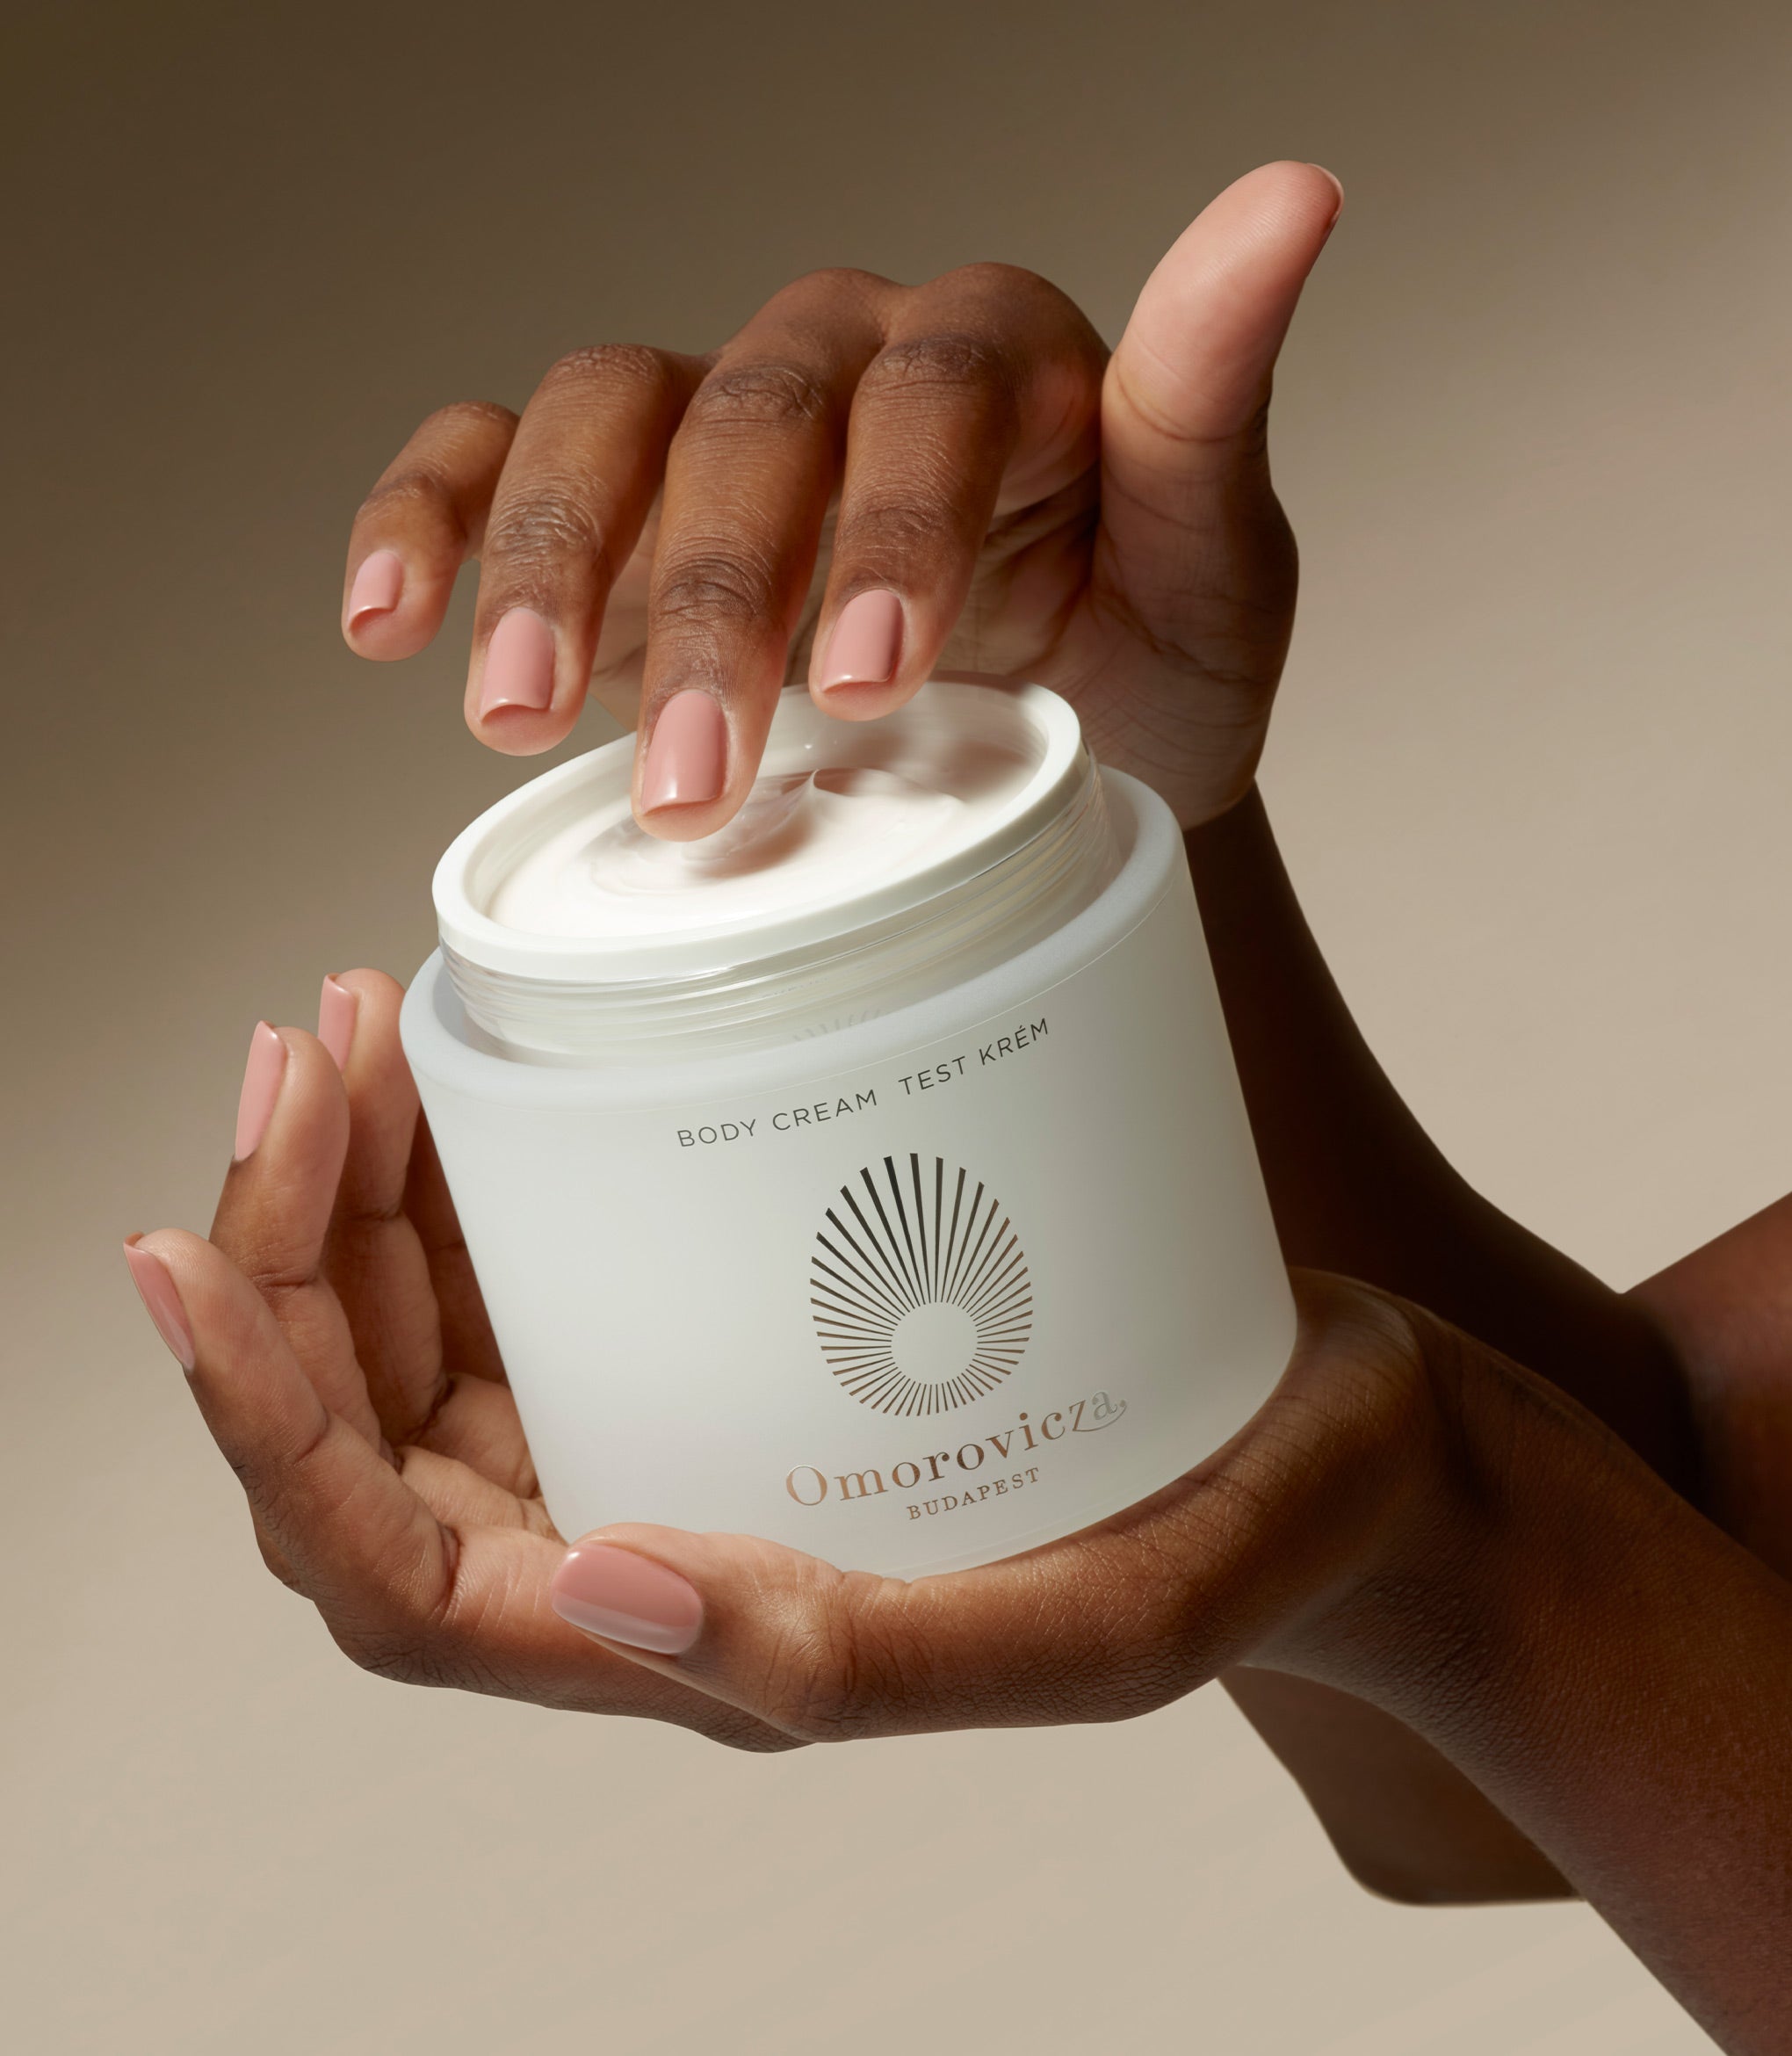 Hands are holding a jar of Omorovicza Body cream.